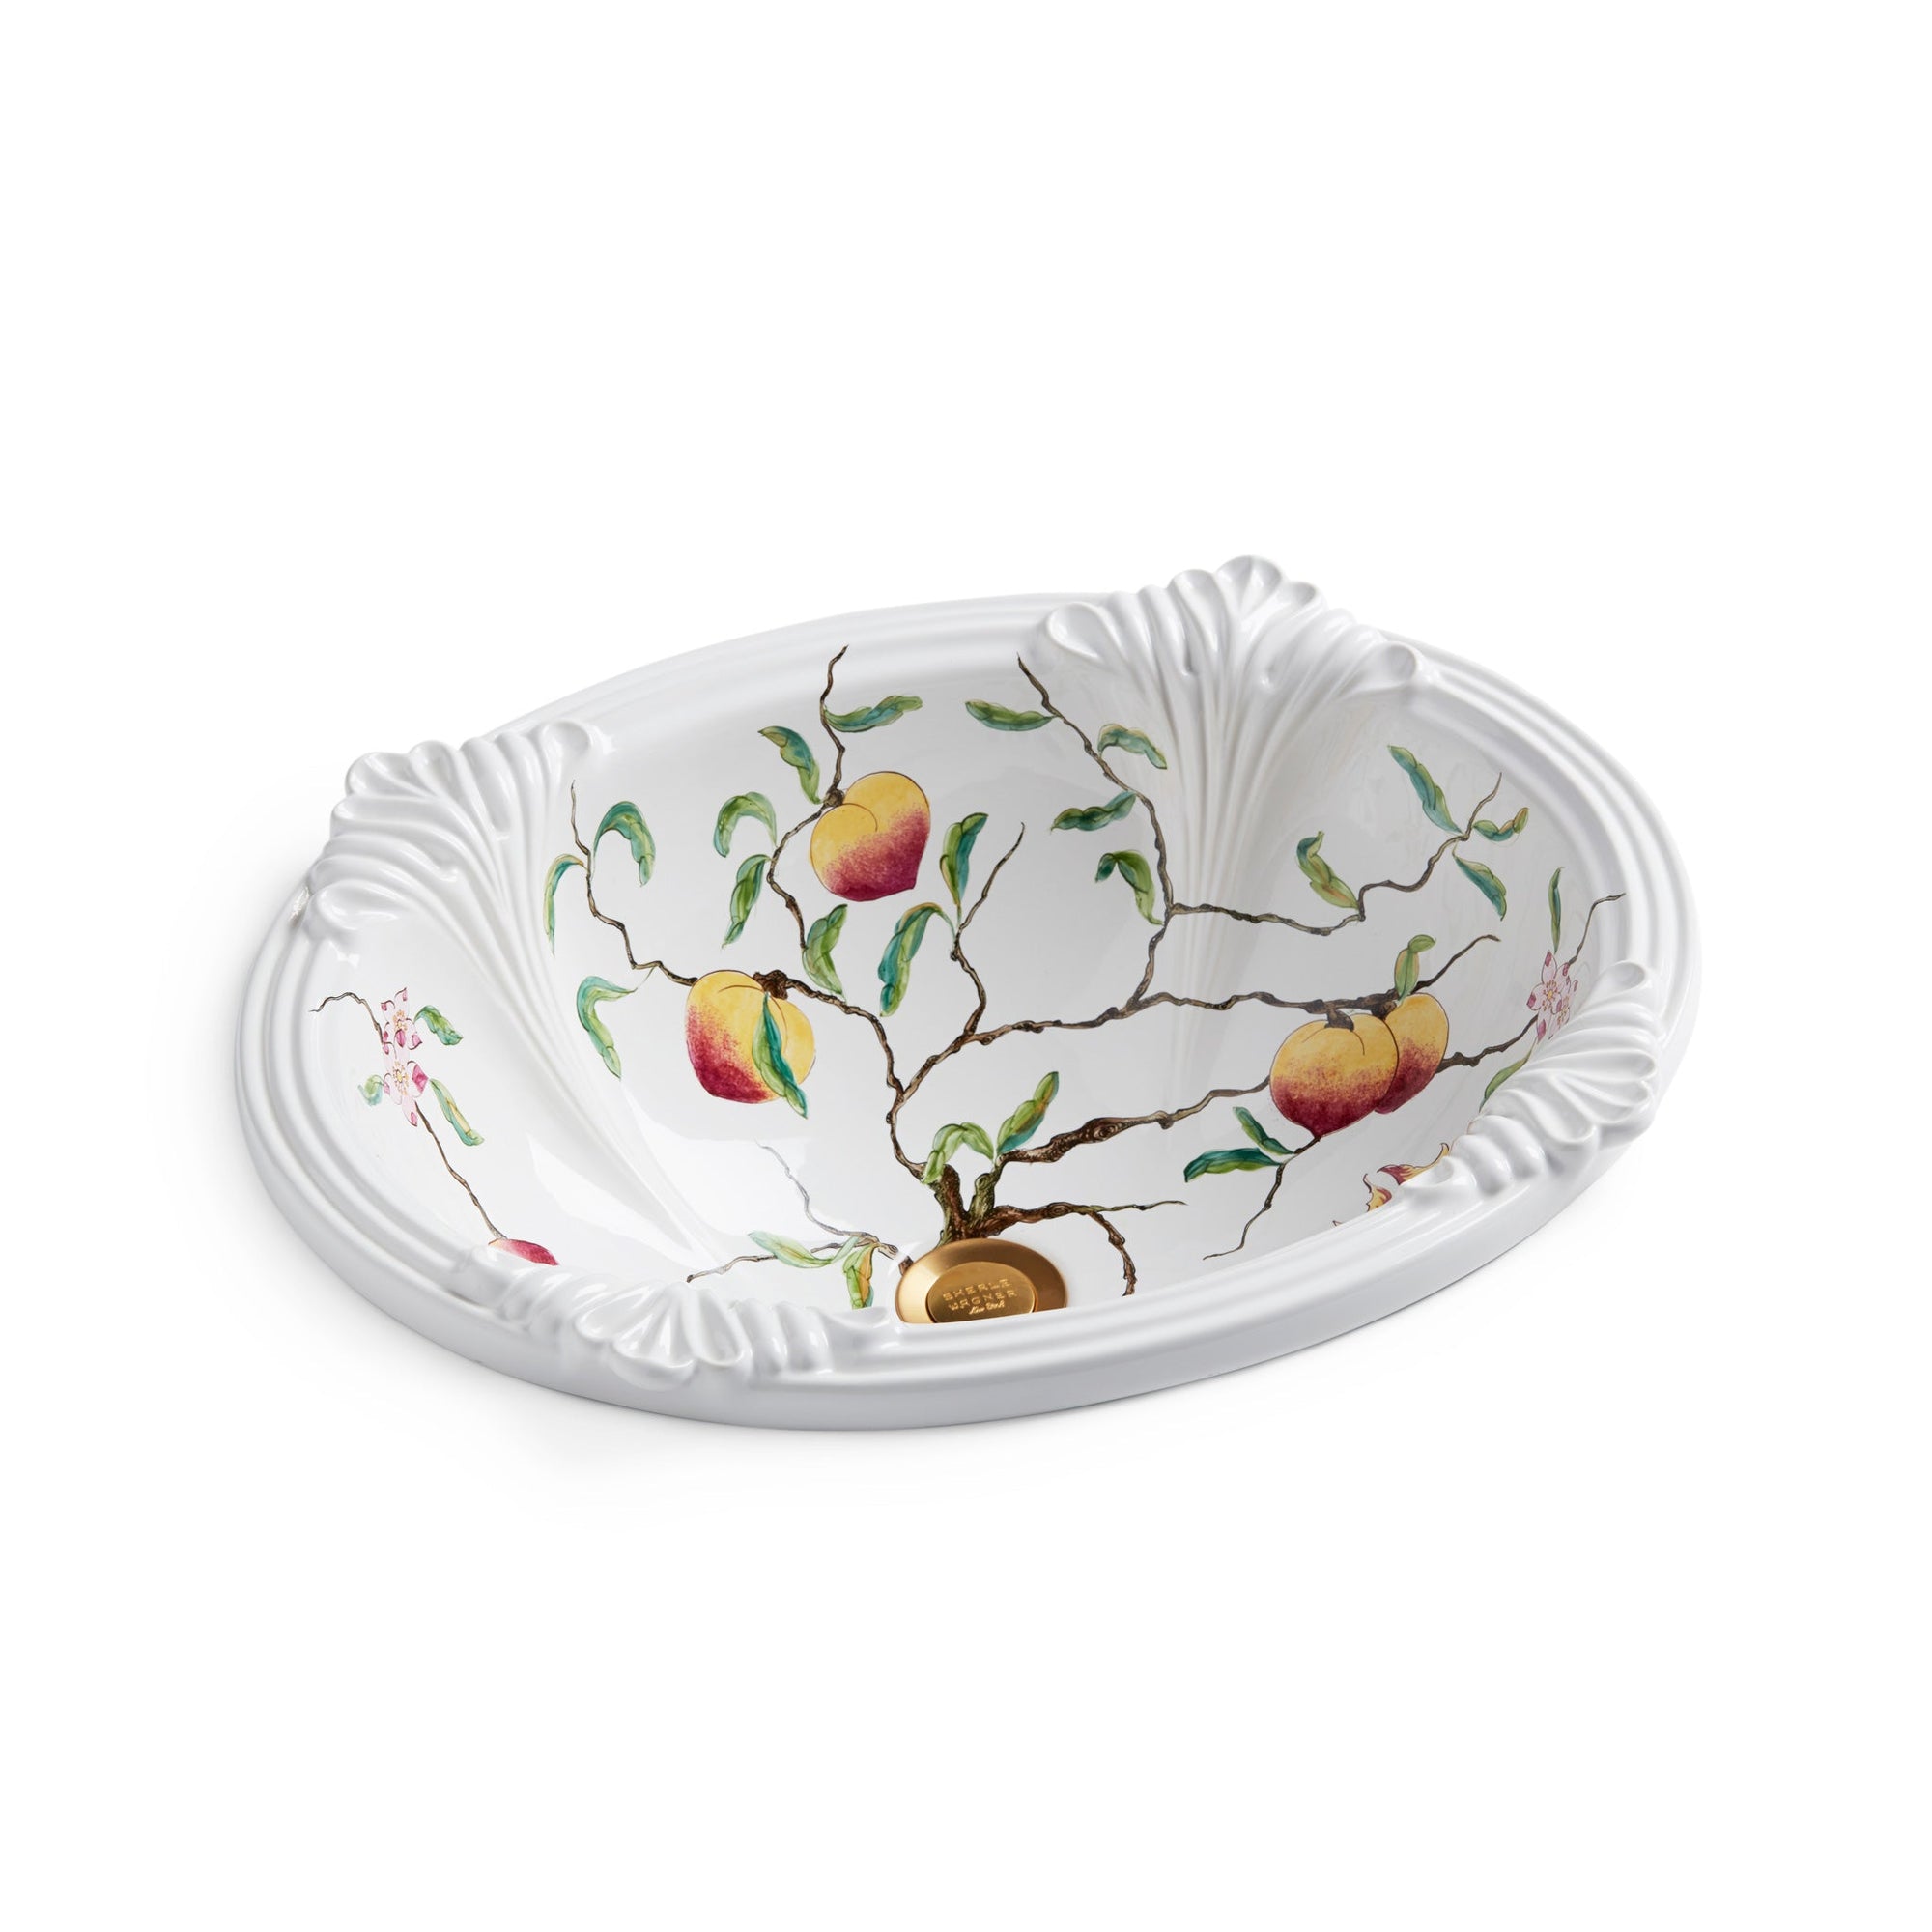 OE4-111P-WH Sherle Wagner International Peaches on White Provence Ceramic Over Edge Sink